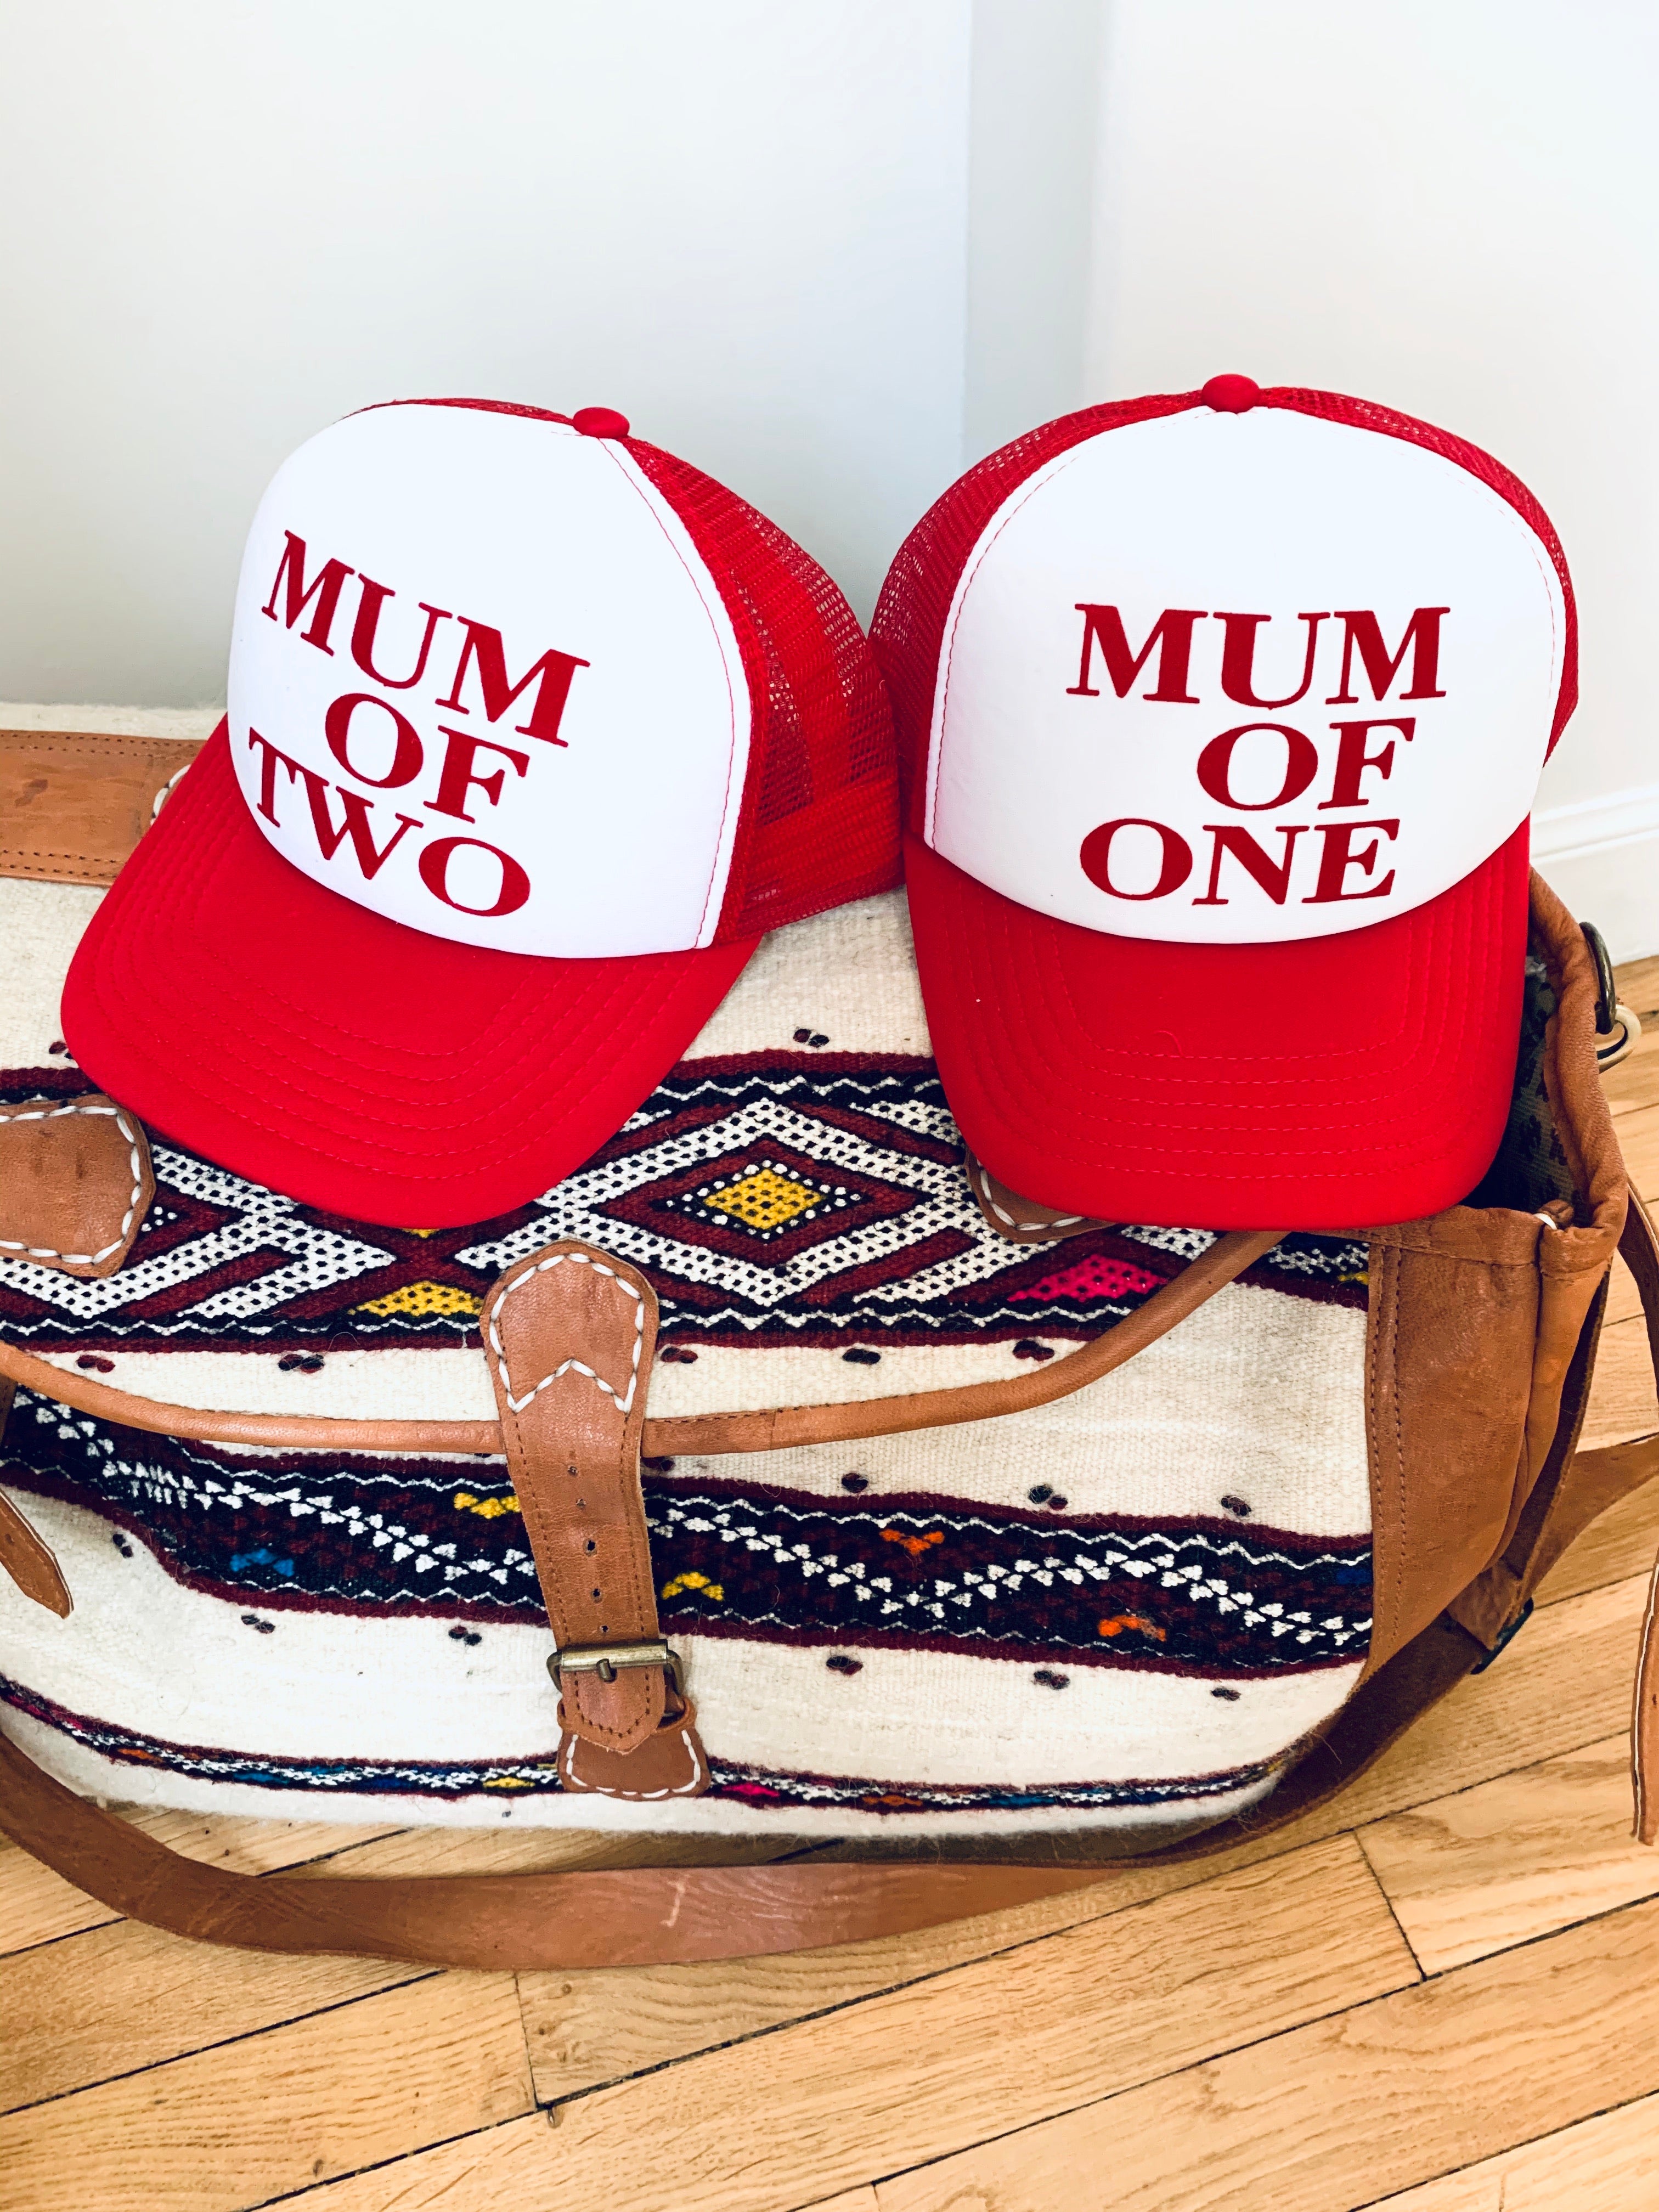 MUM OF CAP - RED AND WHITE - Available for MUM OF ONE, TWO, THREE...